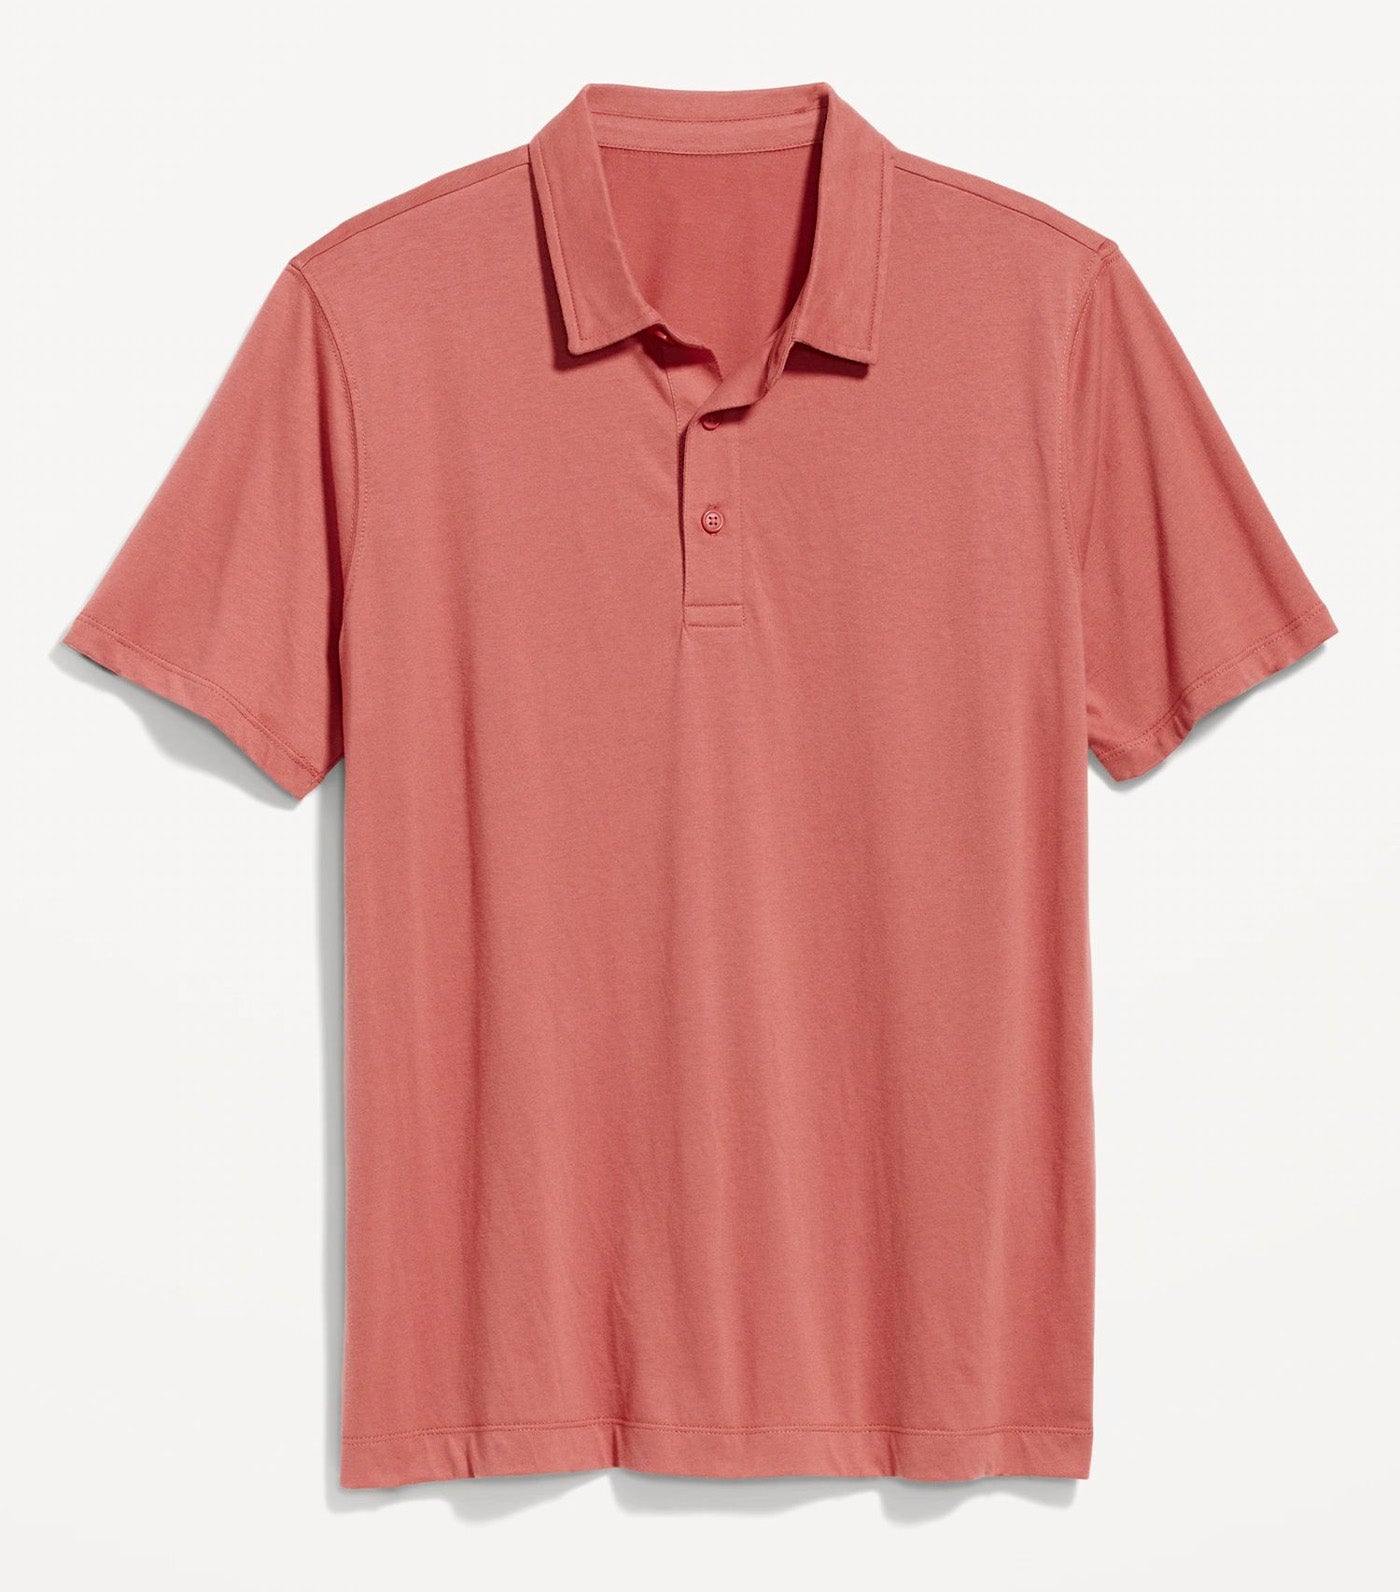 Classic Fit Jersey Polo for Men Spice Girl